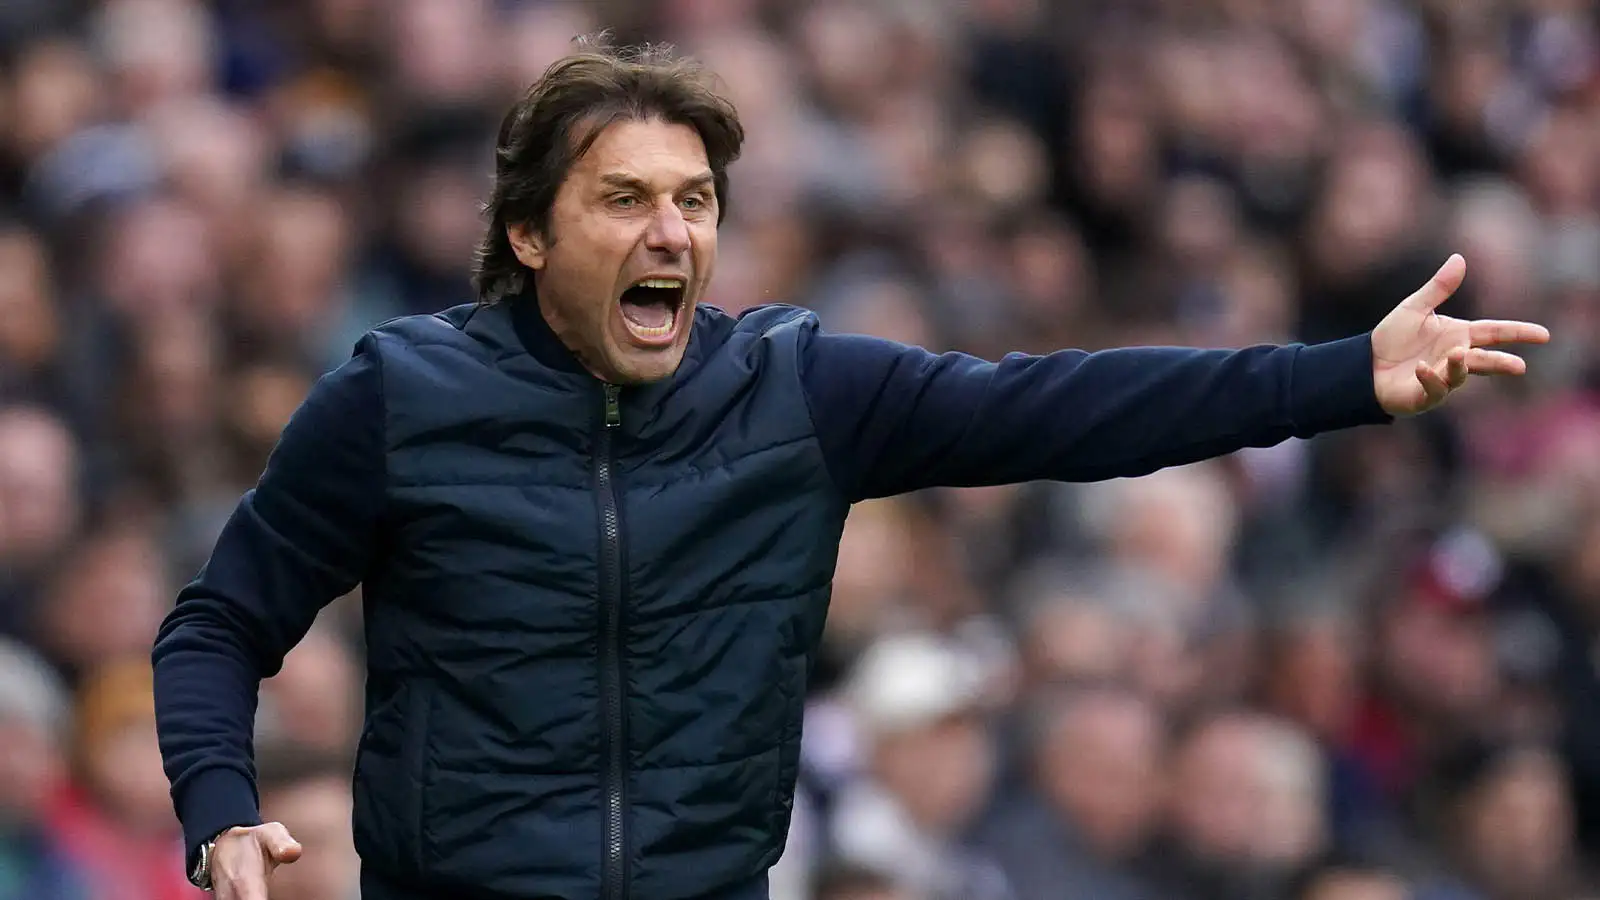 Antonio Conte bounces back from Tottenham exit with Serie A side in contact for sudden managerial change